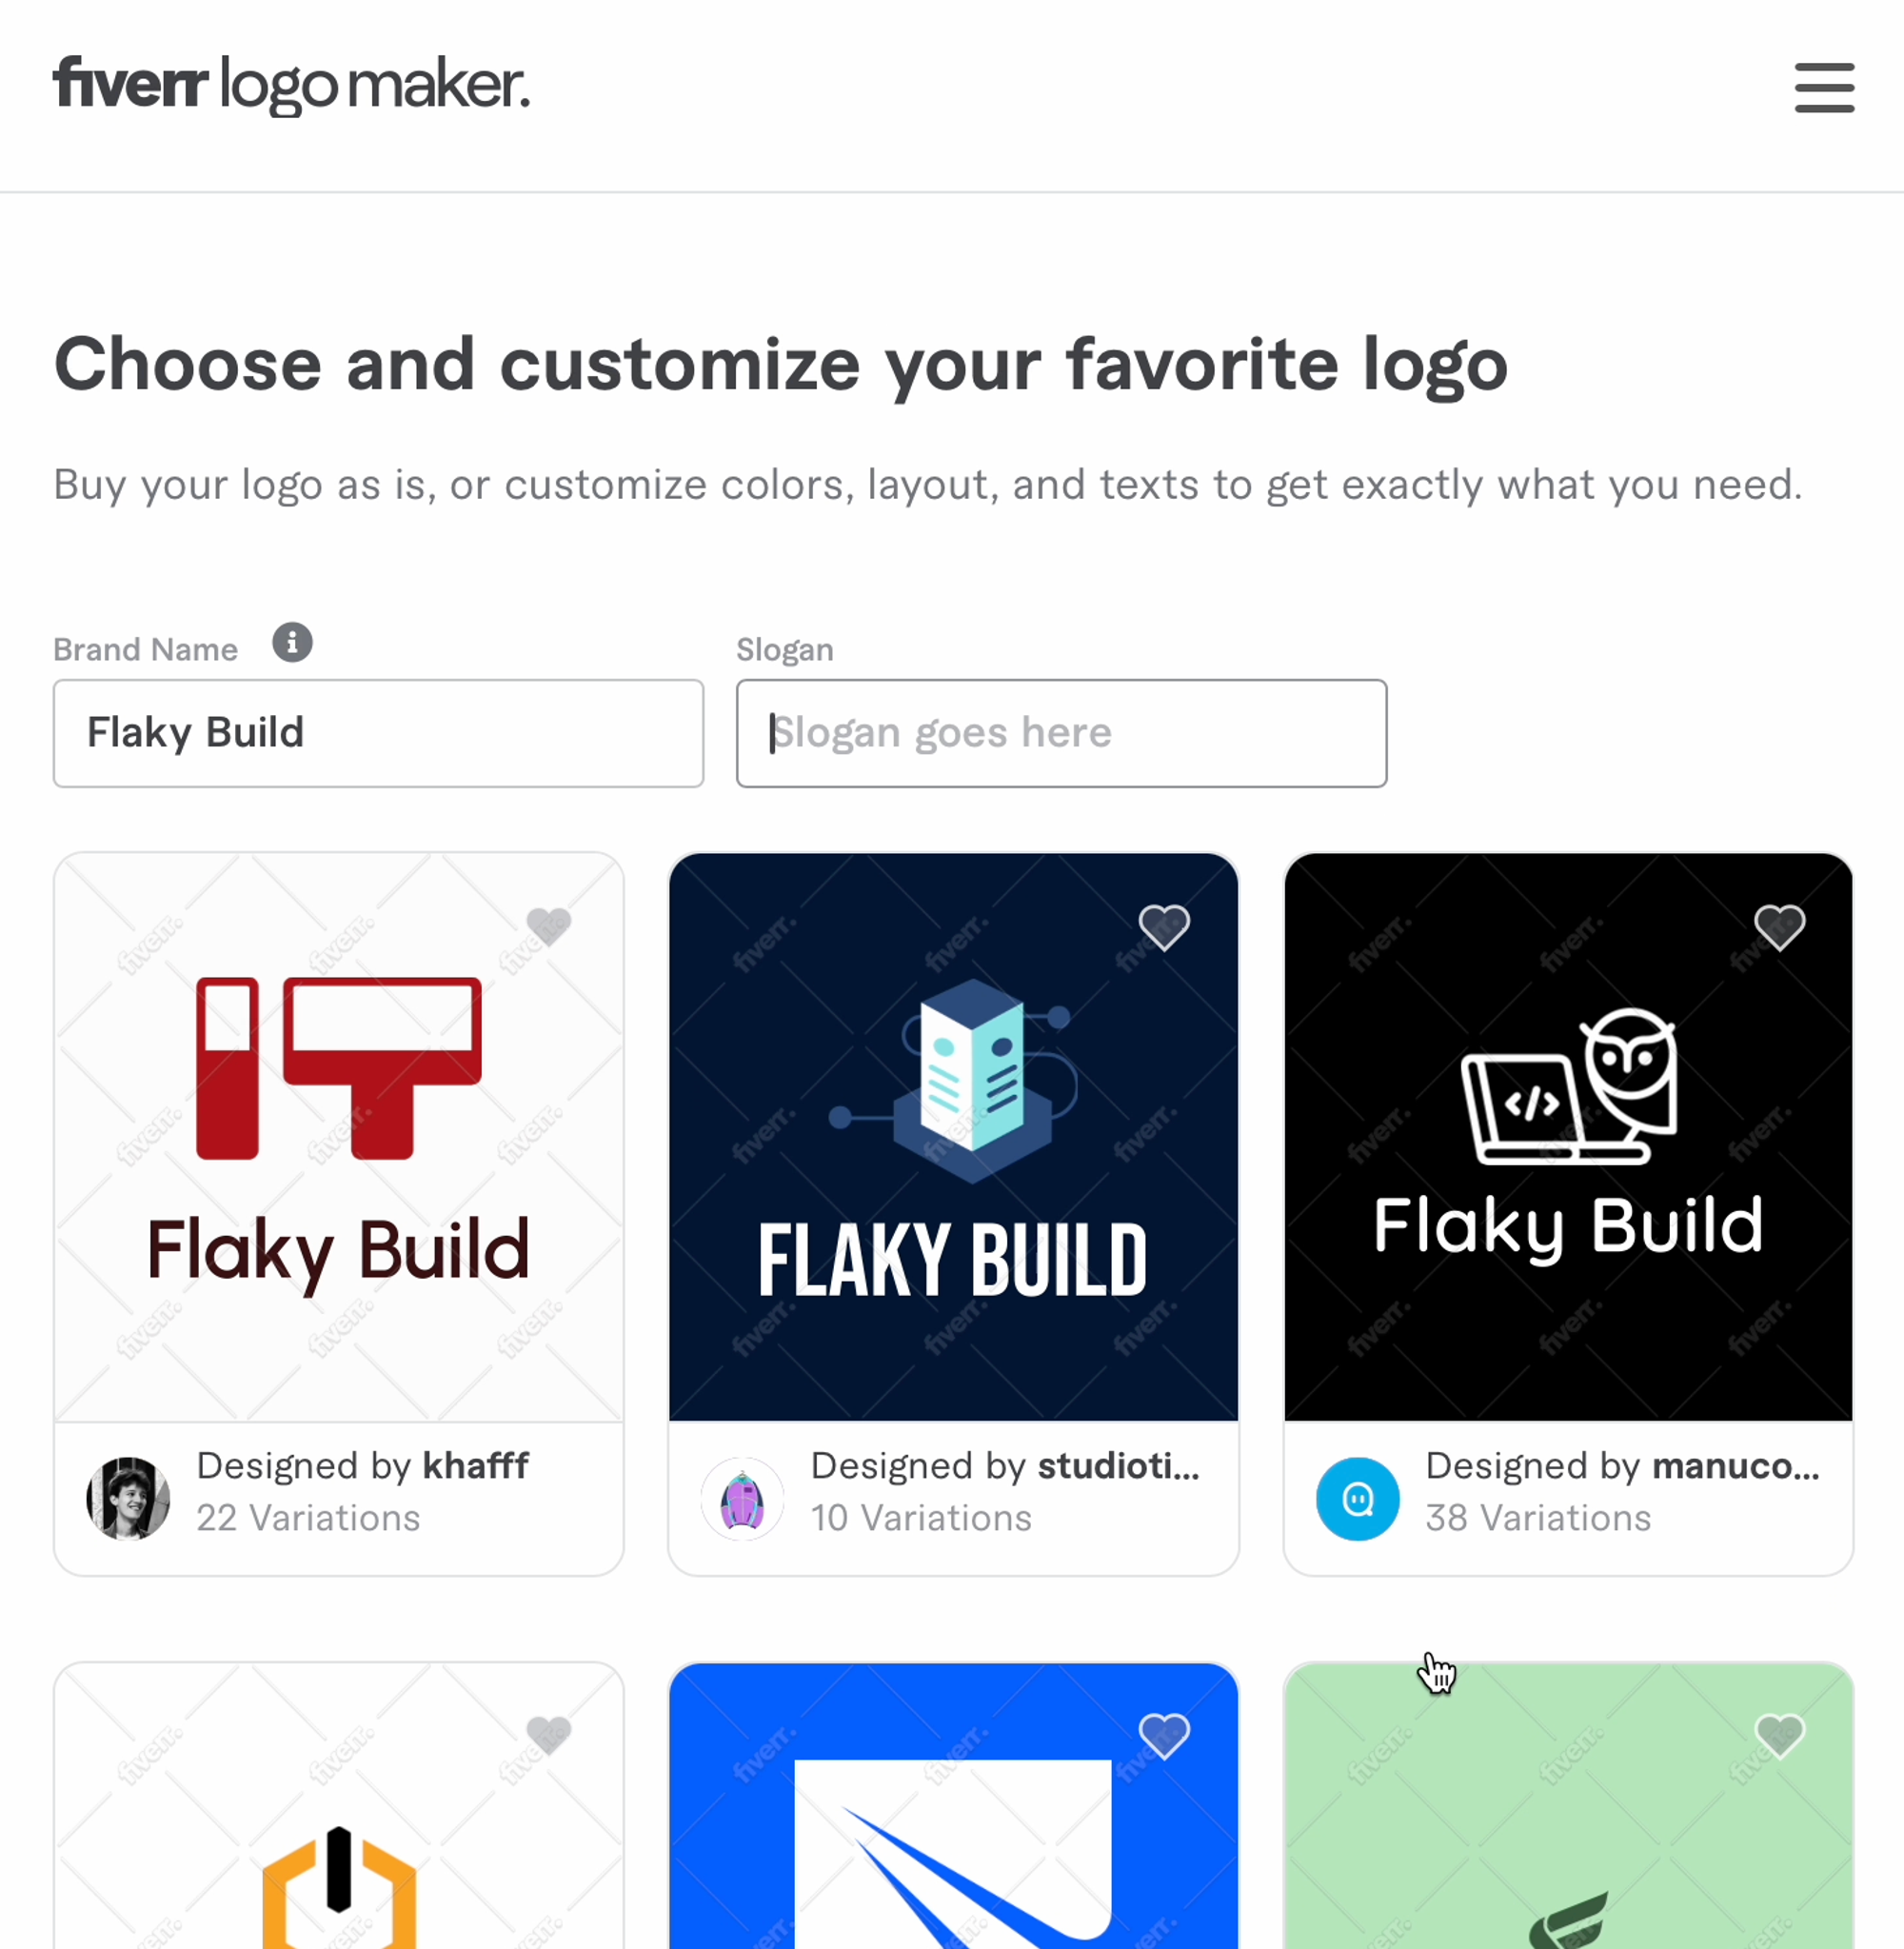 Example logos in Fiverr Logo Maker for “Flaky Build” with industry “Software development” and “3D” style without tweaking the parameters.